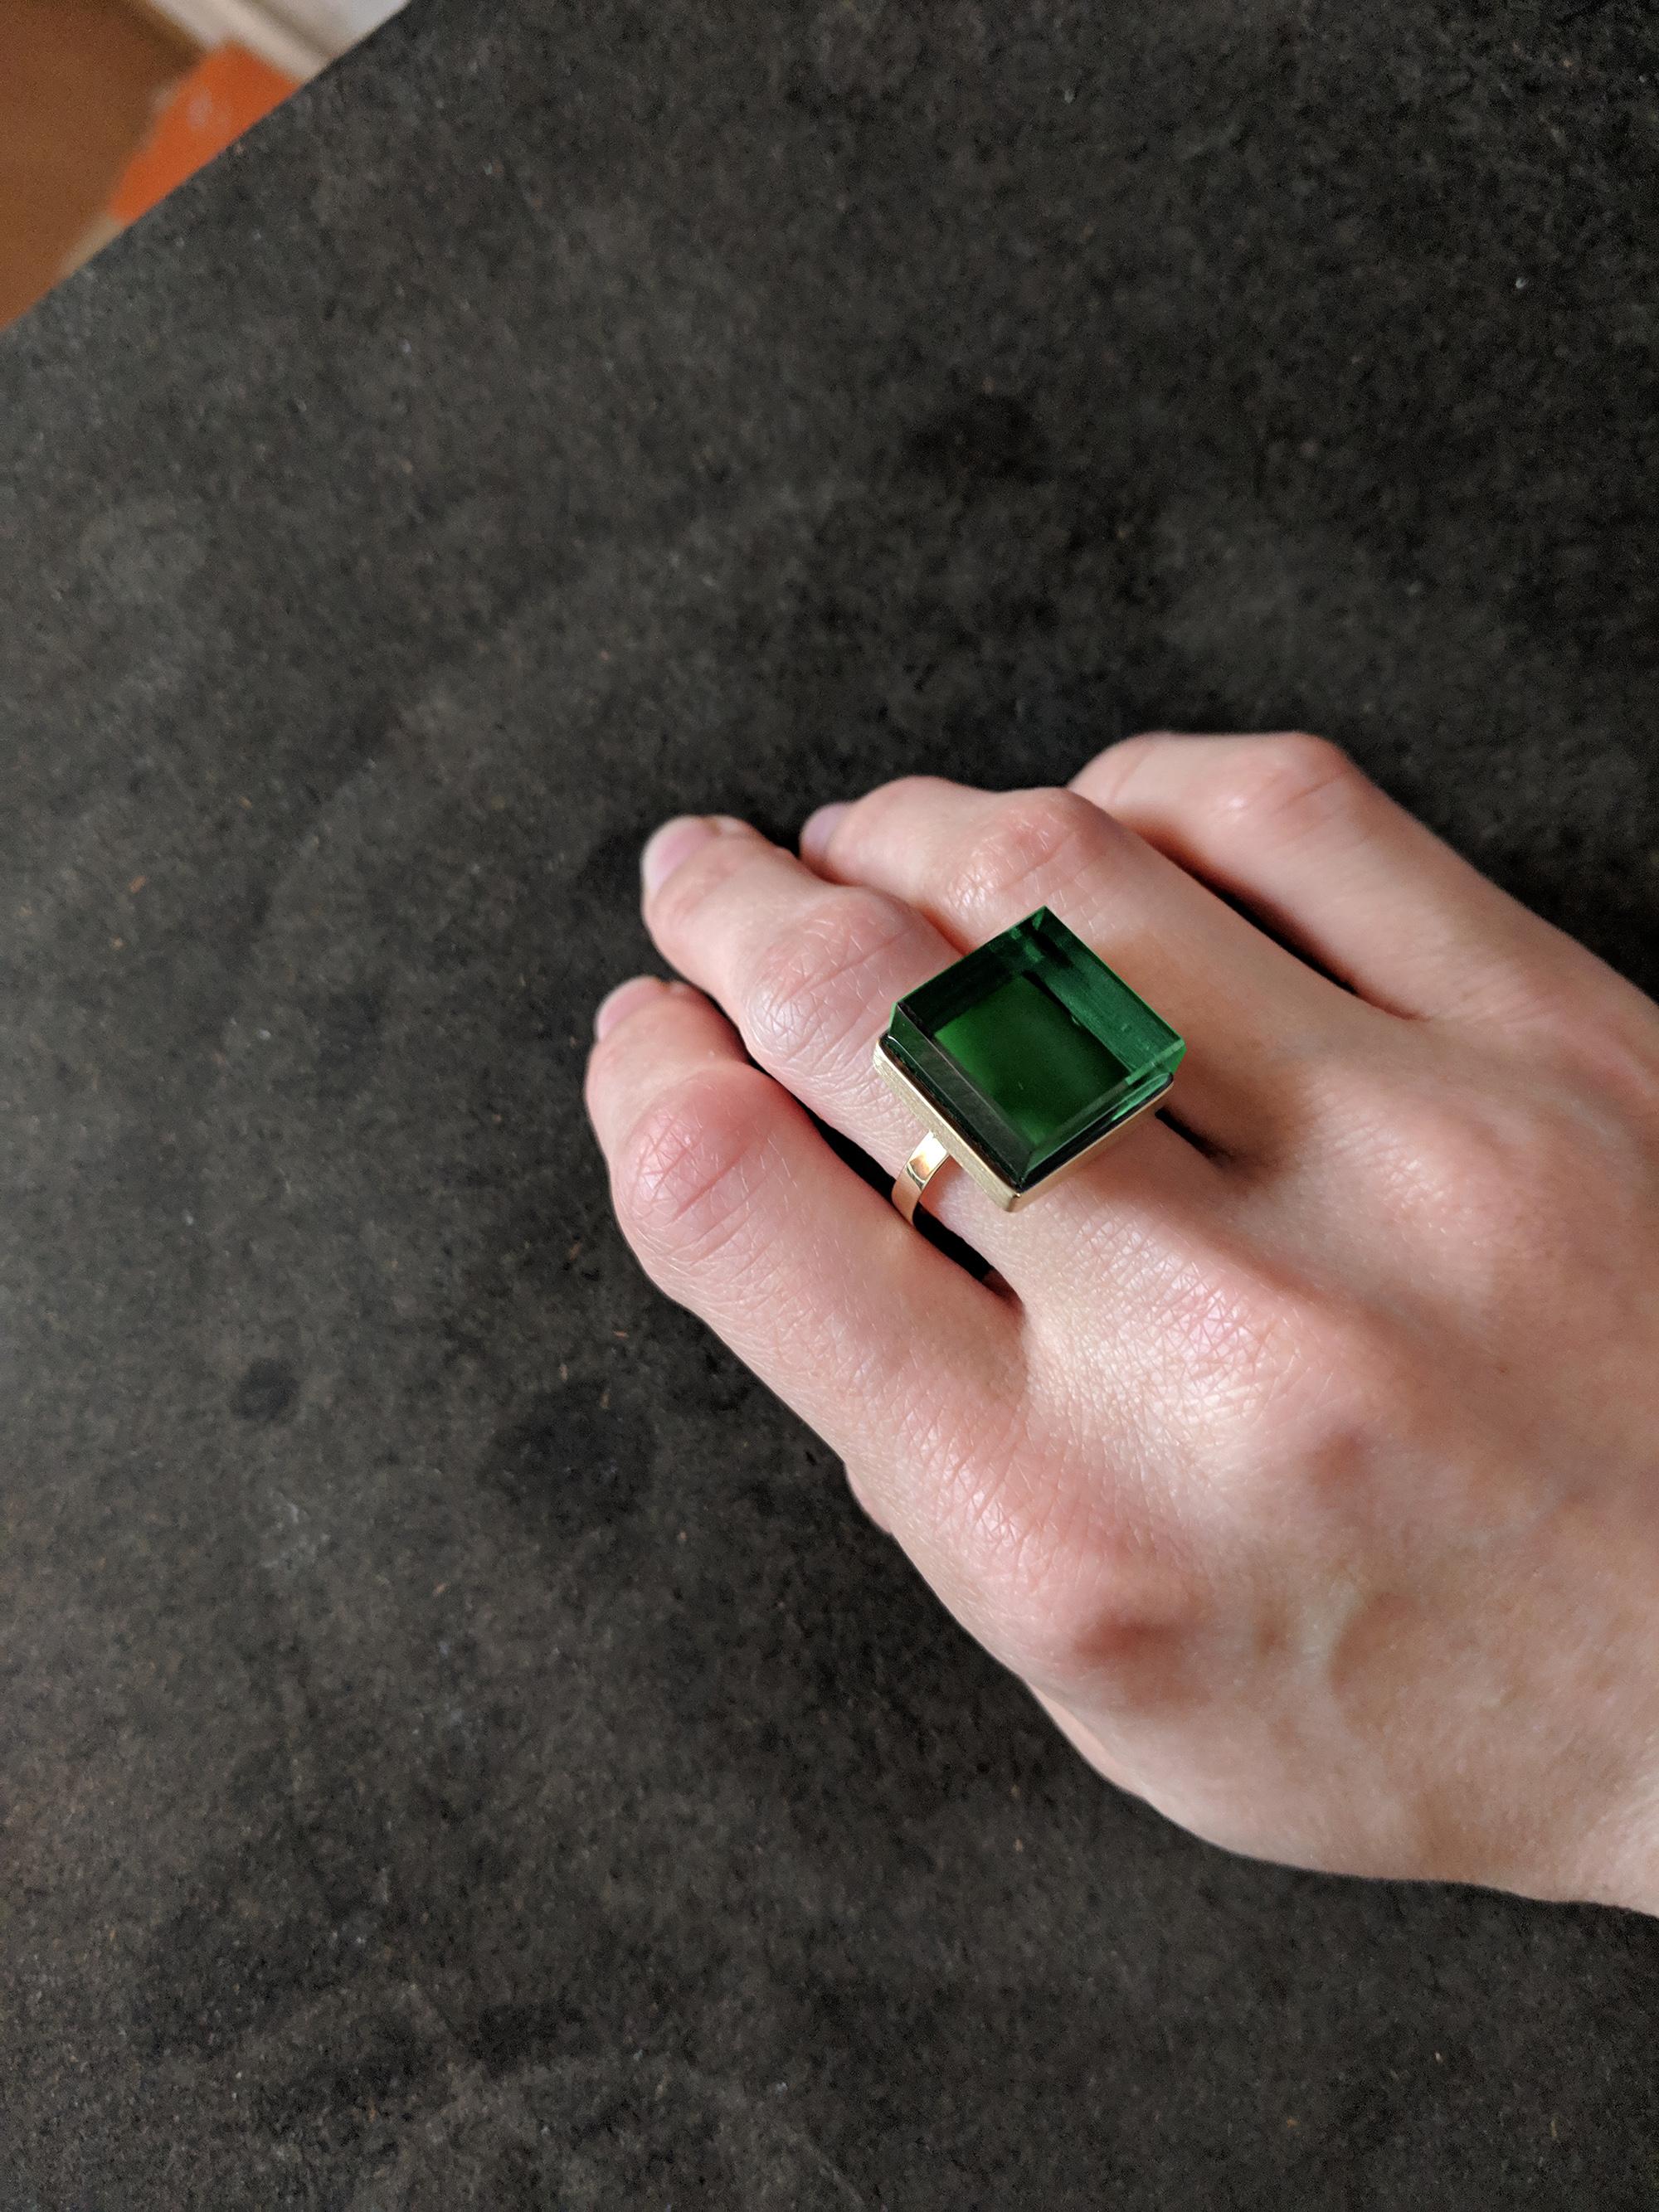 This cocktail ring is in 18 karat yellow gold with 15x15x8 mm green grown quartz. It was published in Harper's Bazaar and Vogue UA. 

The ring reflects the art deco spirit and fits to women and men. This ring inspires the architects, designers and